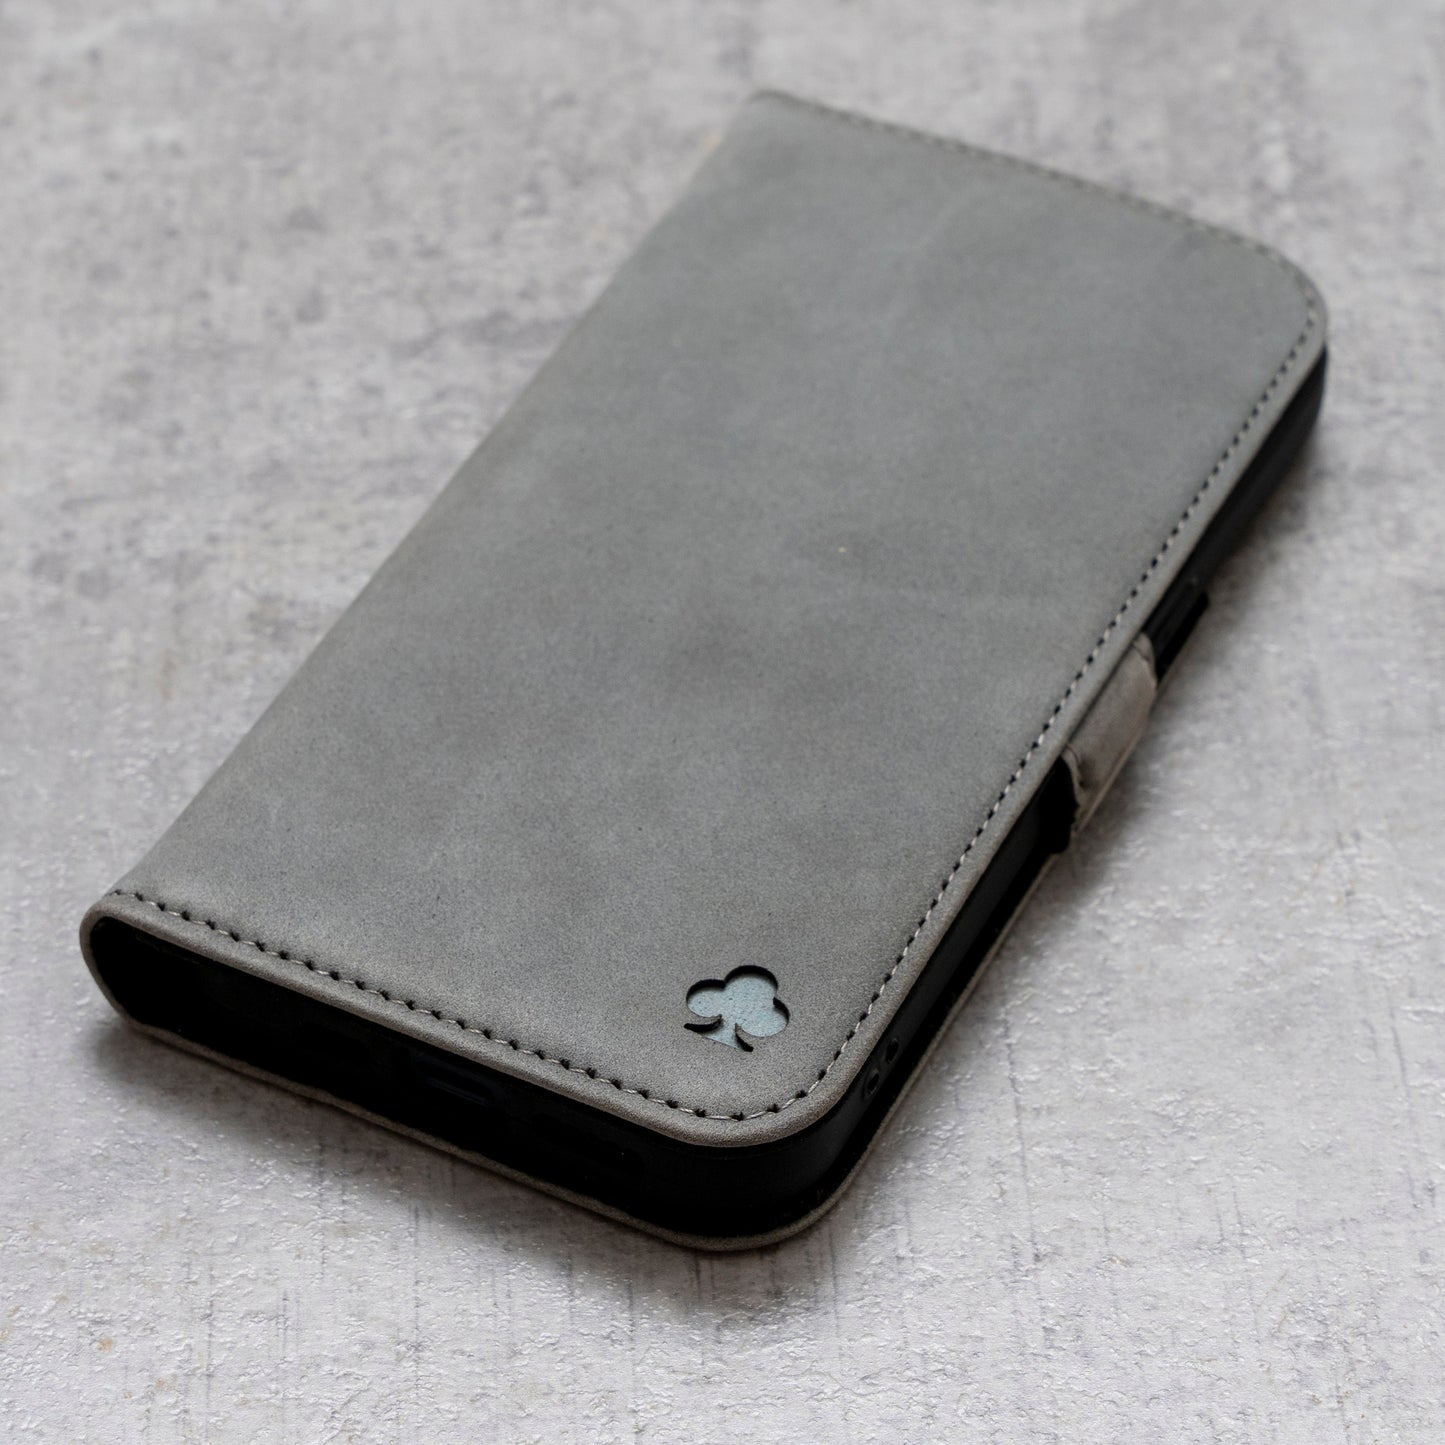 iPhone X / iPhone XS Leather Case. Premium Nubuck Genuine Leather Stand Case/Cover/Wallet (Grey, Black)